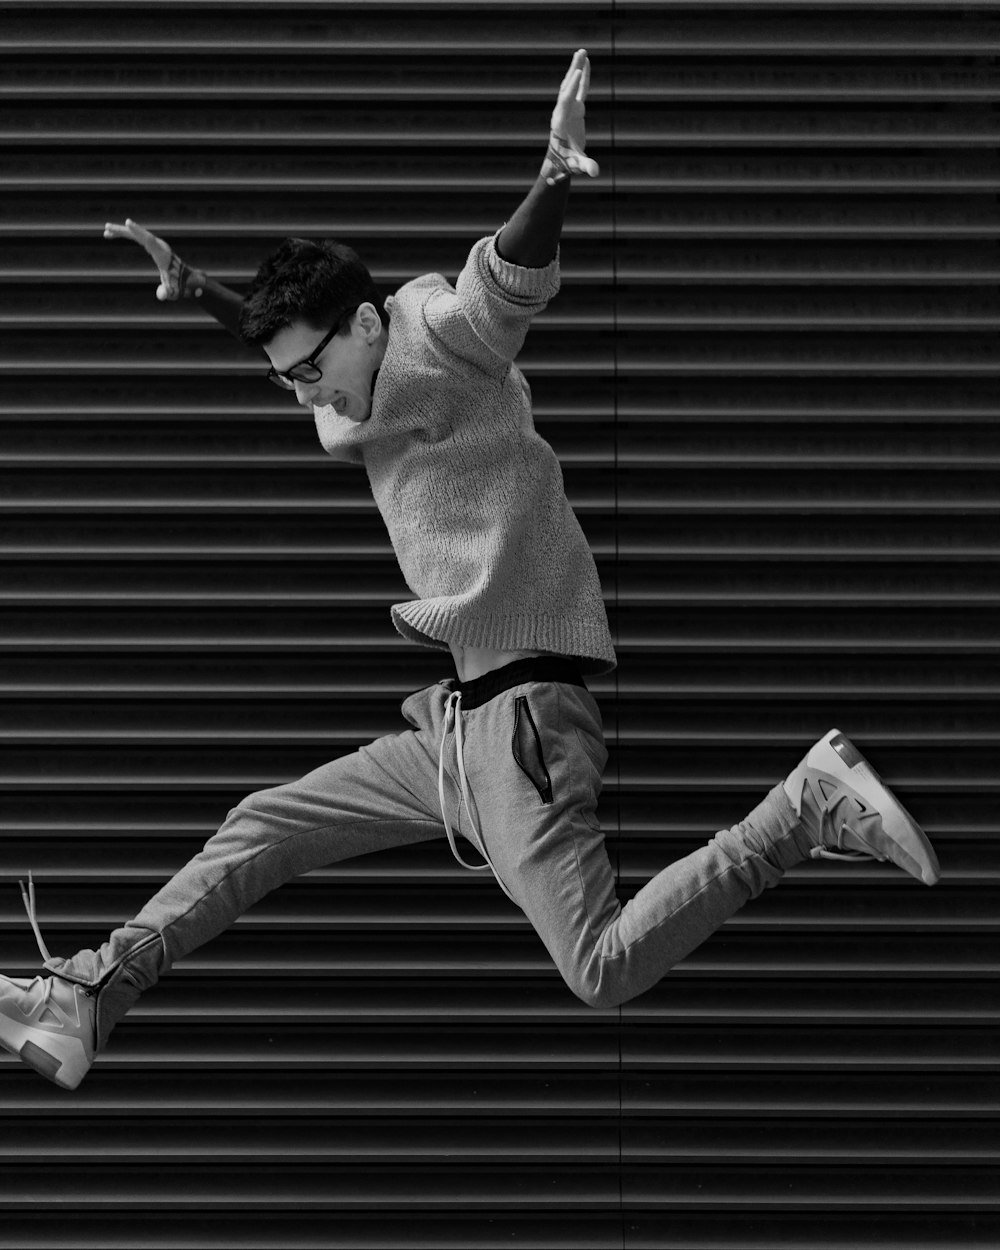 grayscale photography of person jumping